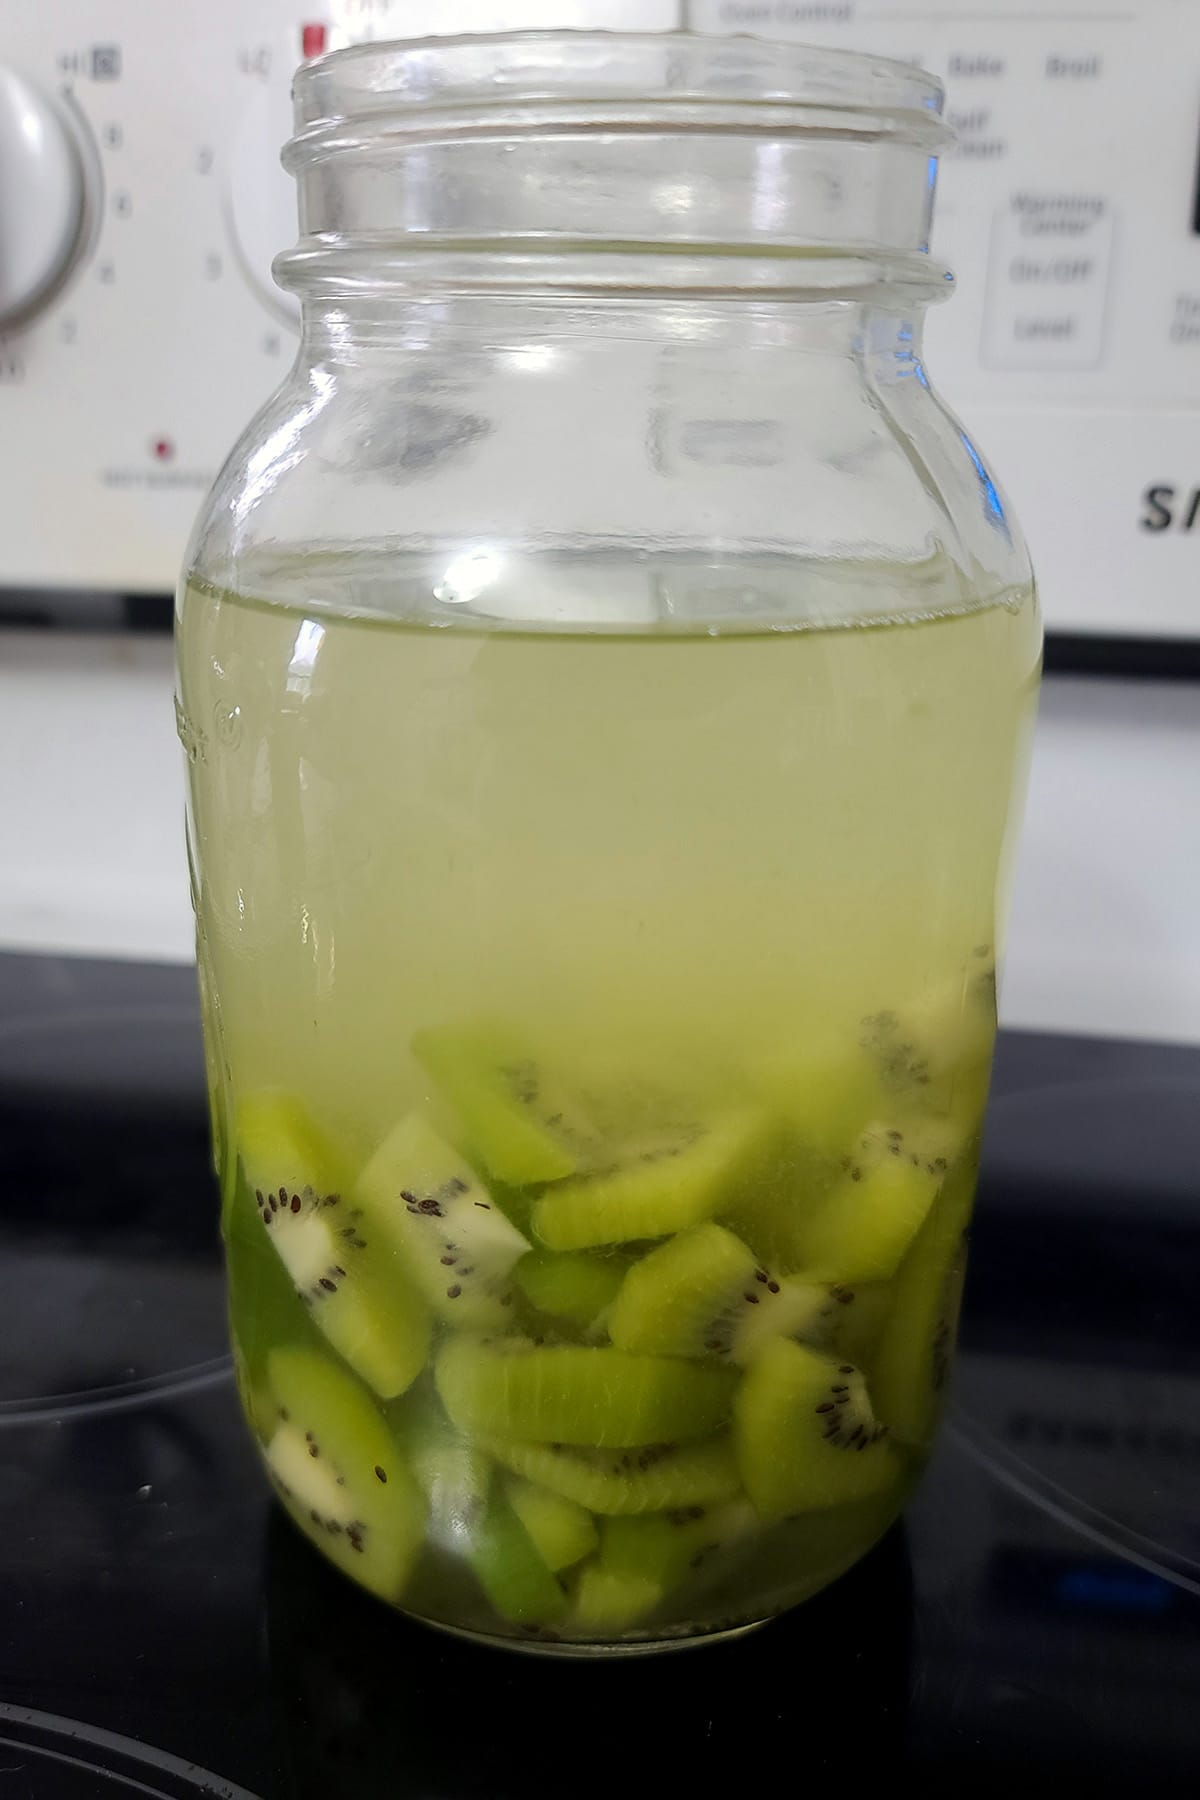 Chopped kiwifruit in a large mason jar with vodka in it. The vodka has a yellow green tinge.